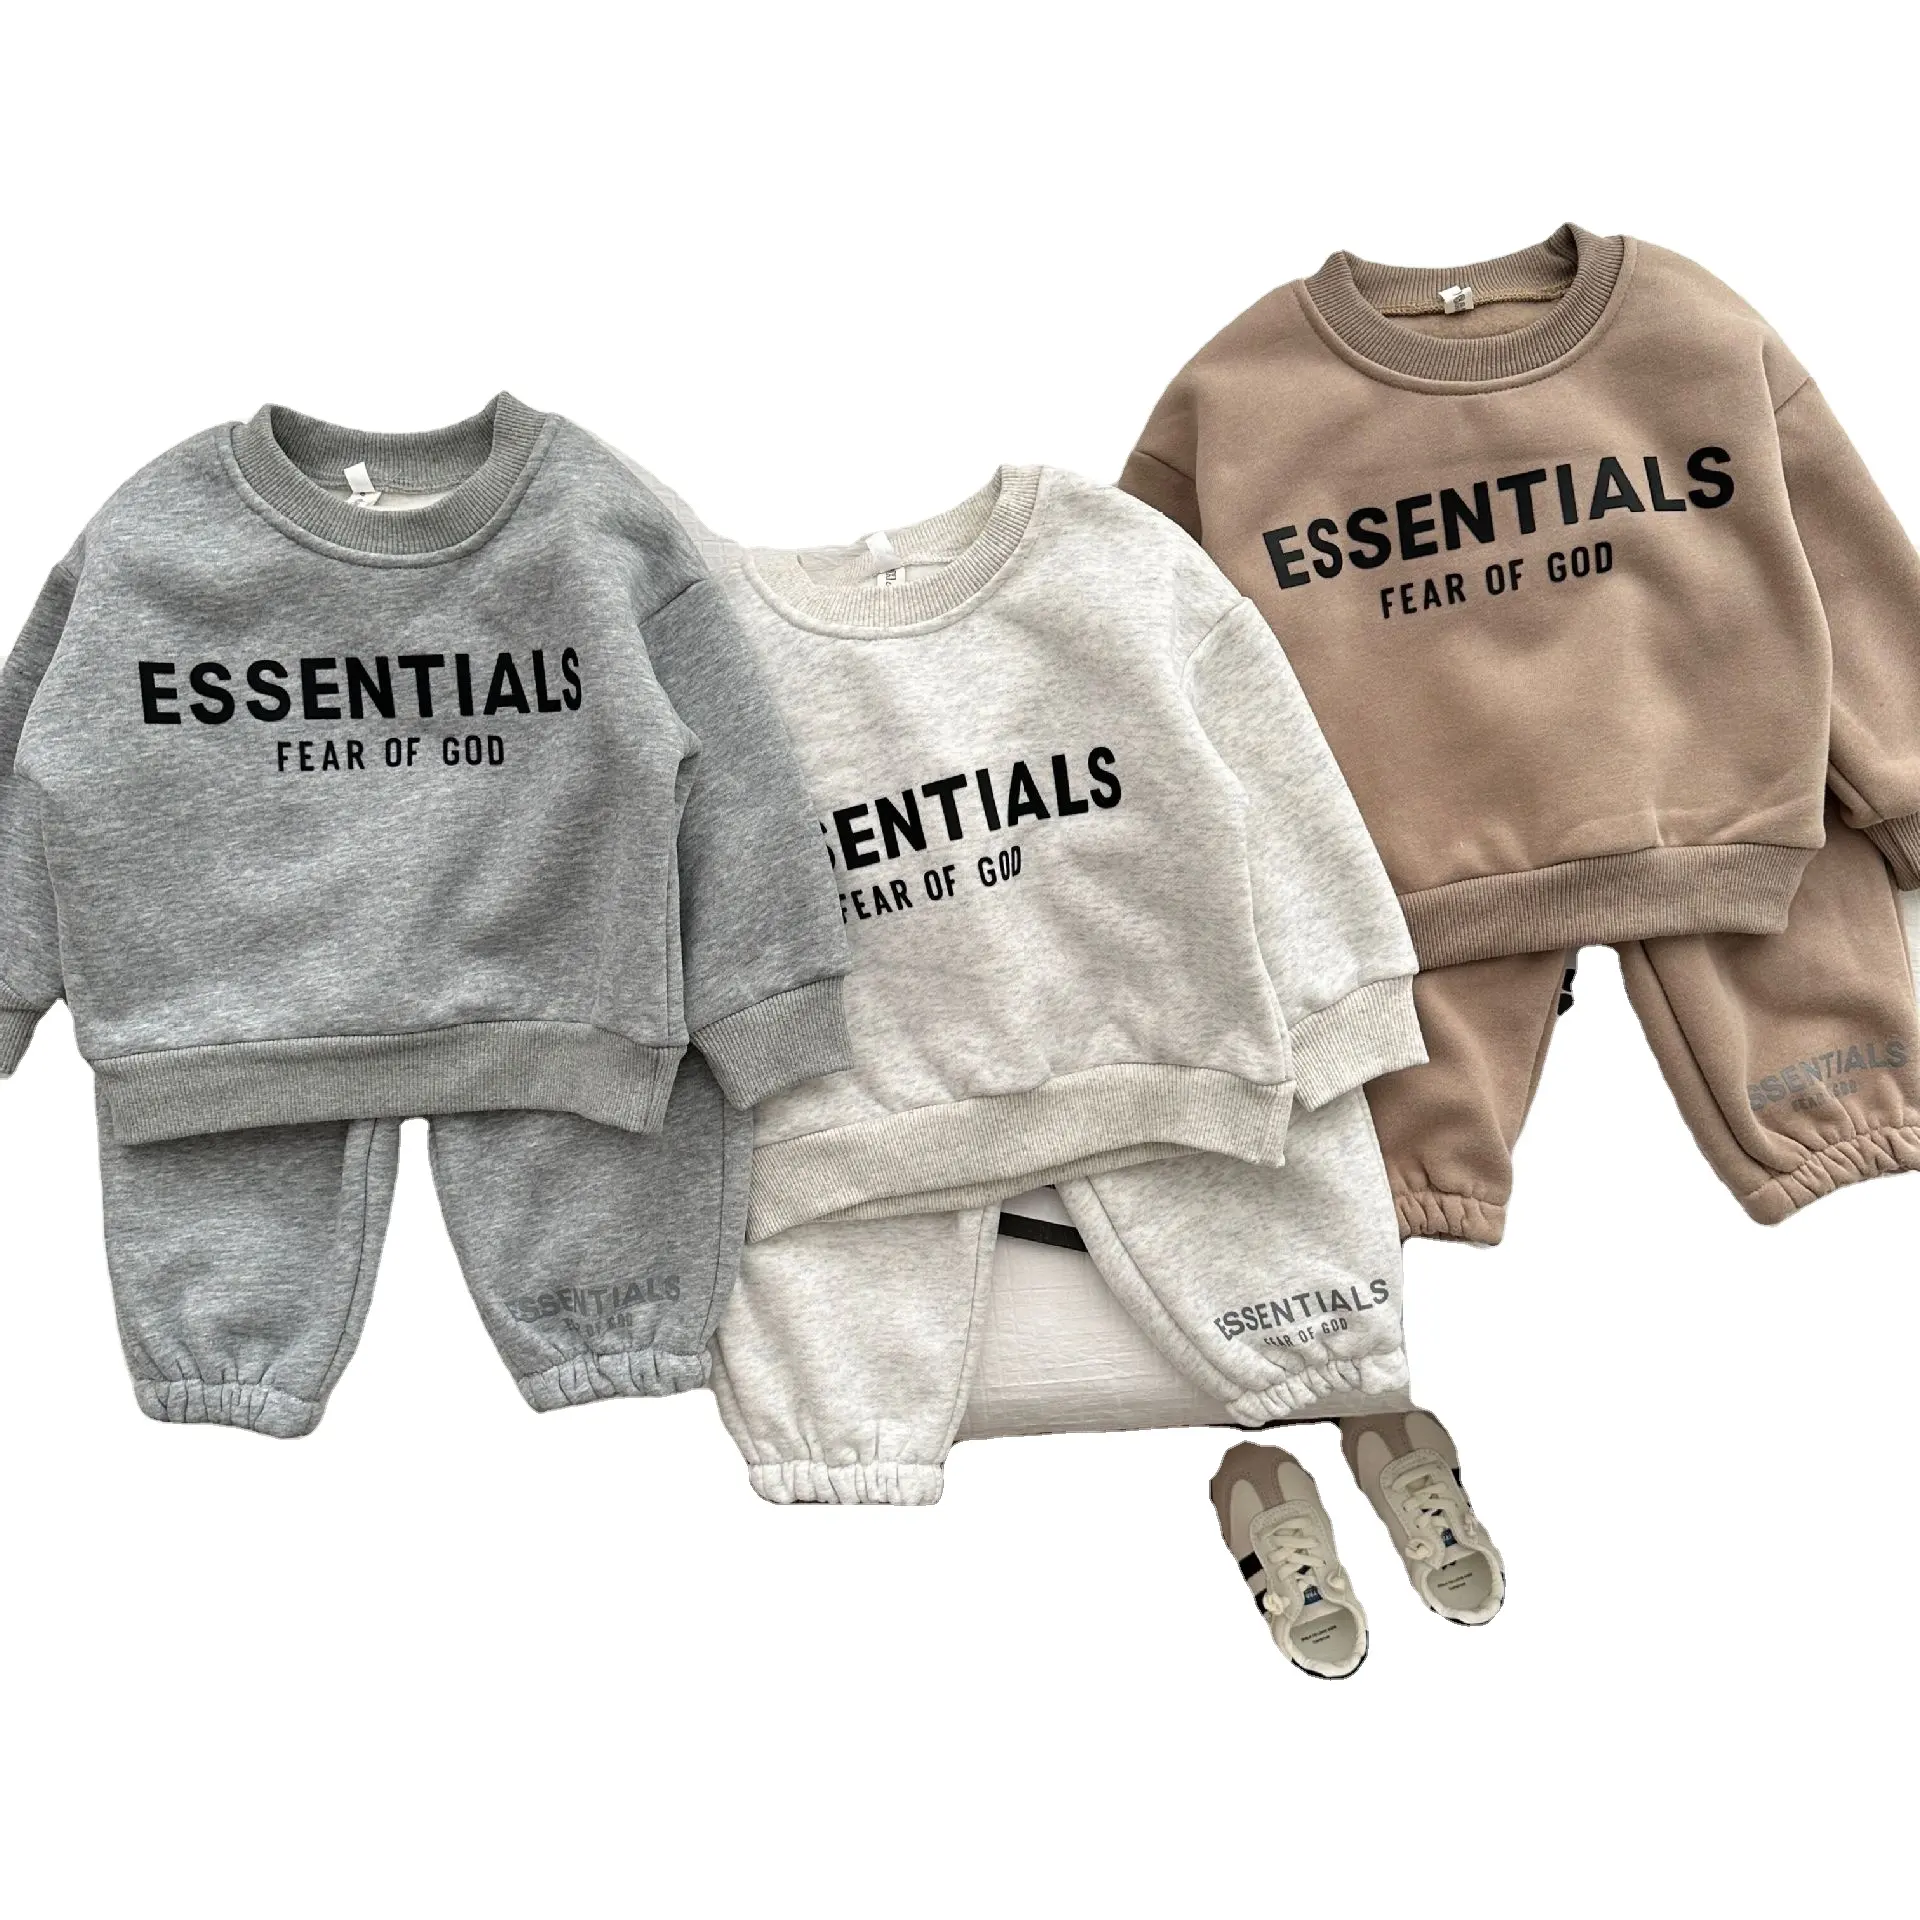 Wholesale Children Clothes Boys Clothing Set winter thicken Cotton sweatshirt and jogger custom kids clothing